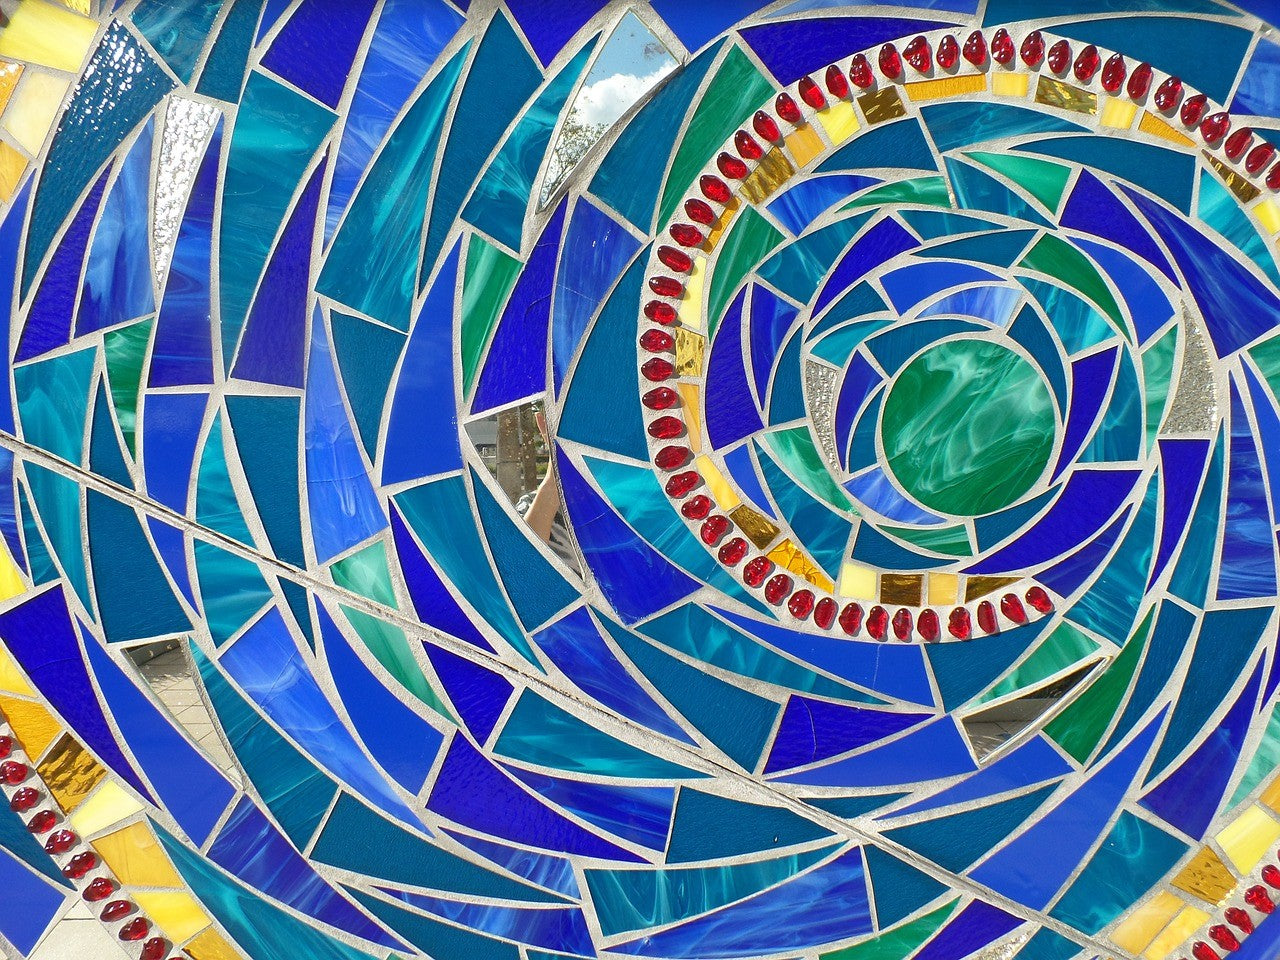 Grouting your Mosaic Piece